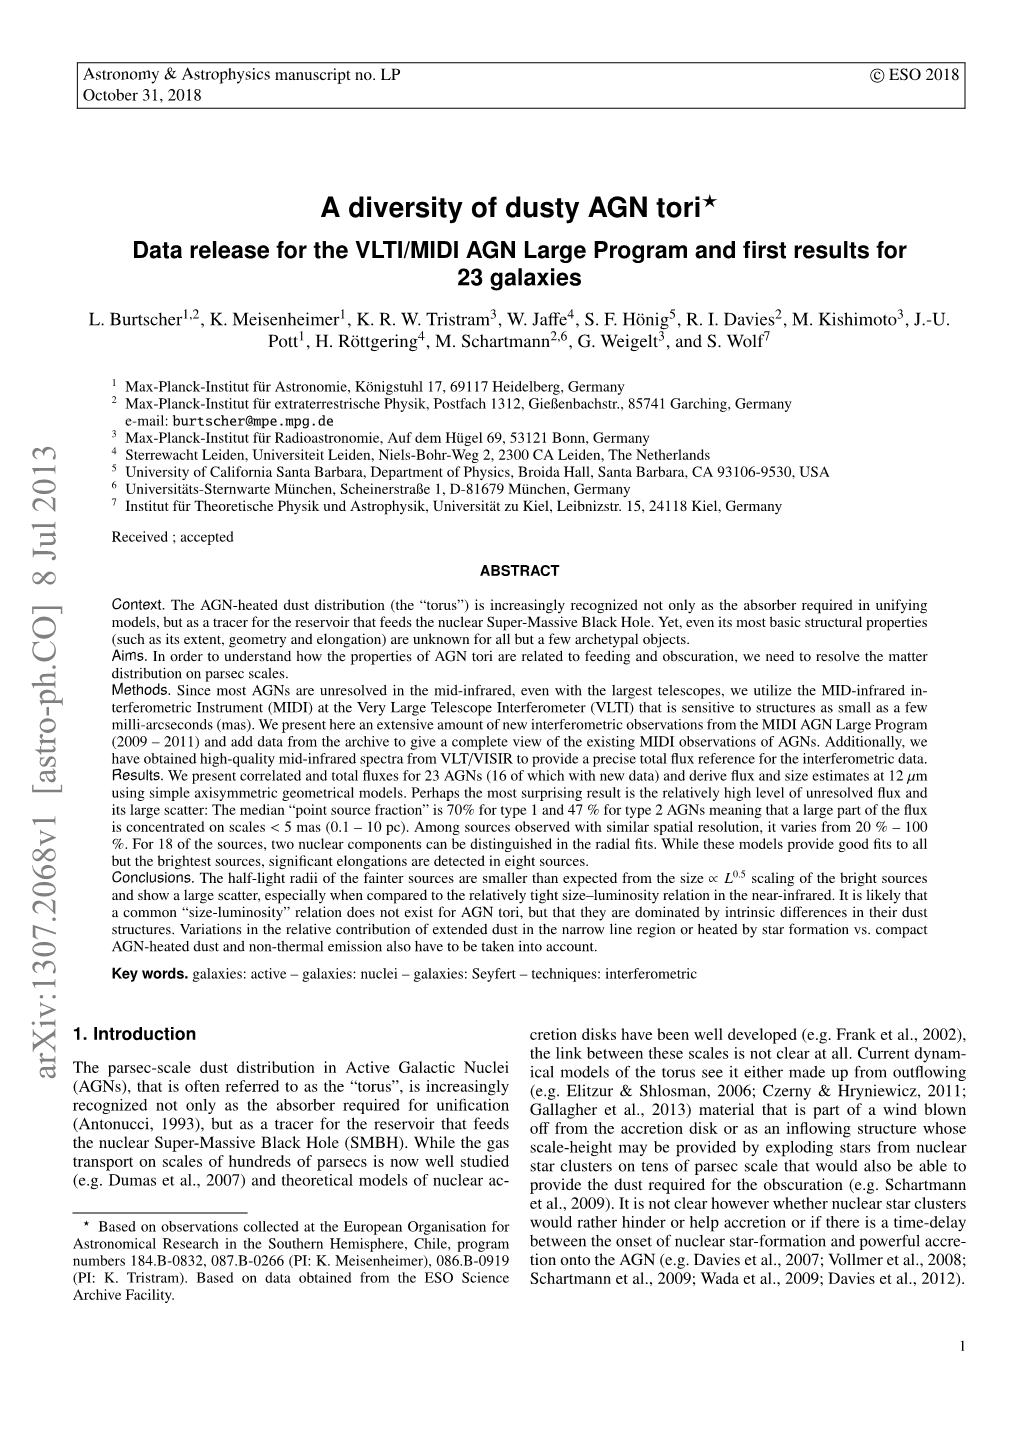 A Diversity of Dusty AGN Tori? Data Release for the VLTI/MIDI AGN Large Program and ﬁrst Results for 23 Galaxies